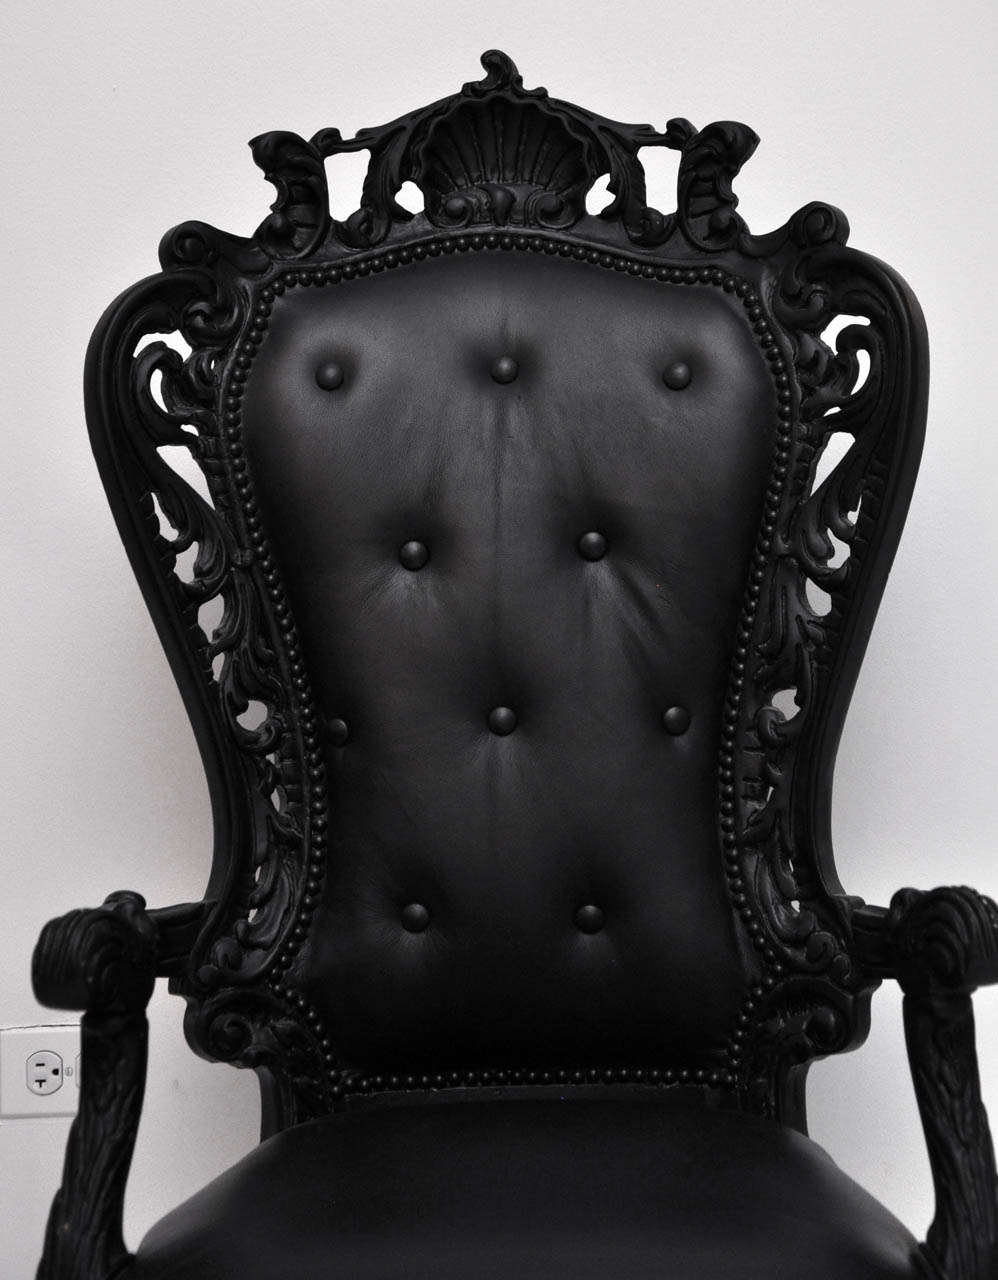 Rococo Revival Pair of Belteresque Chairs